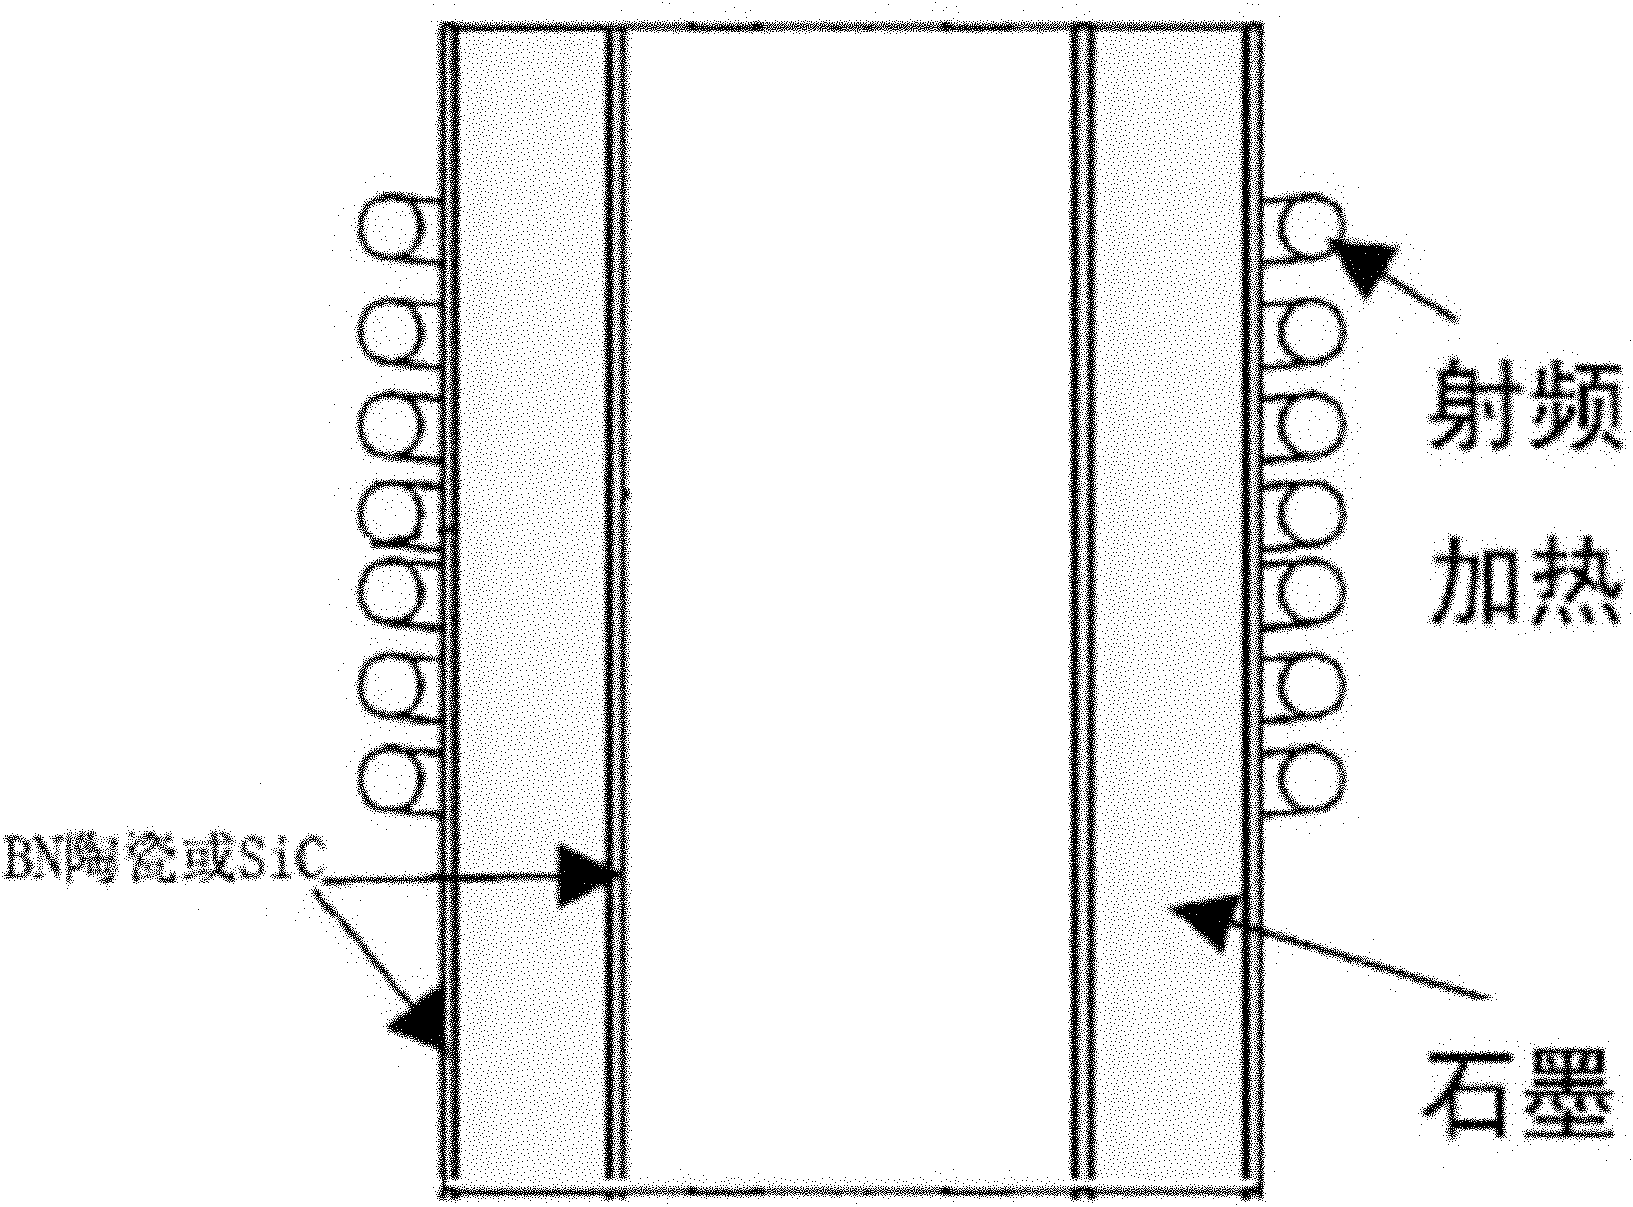 Heating device for semiconducting material hot wall epitaxy growth system